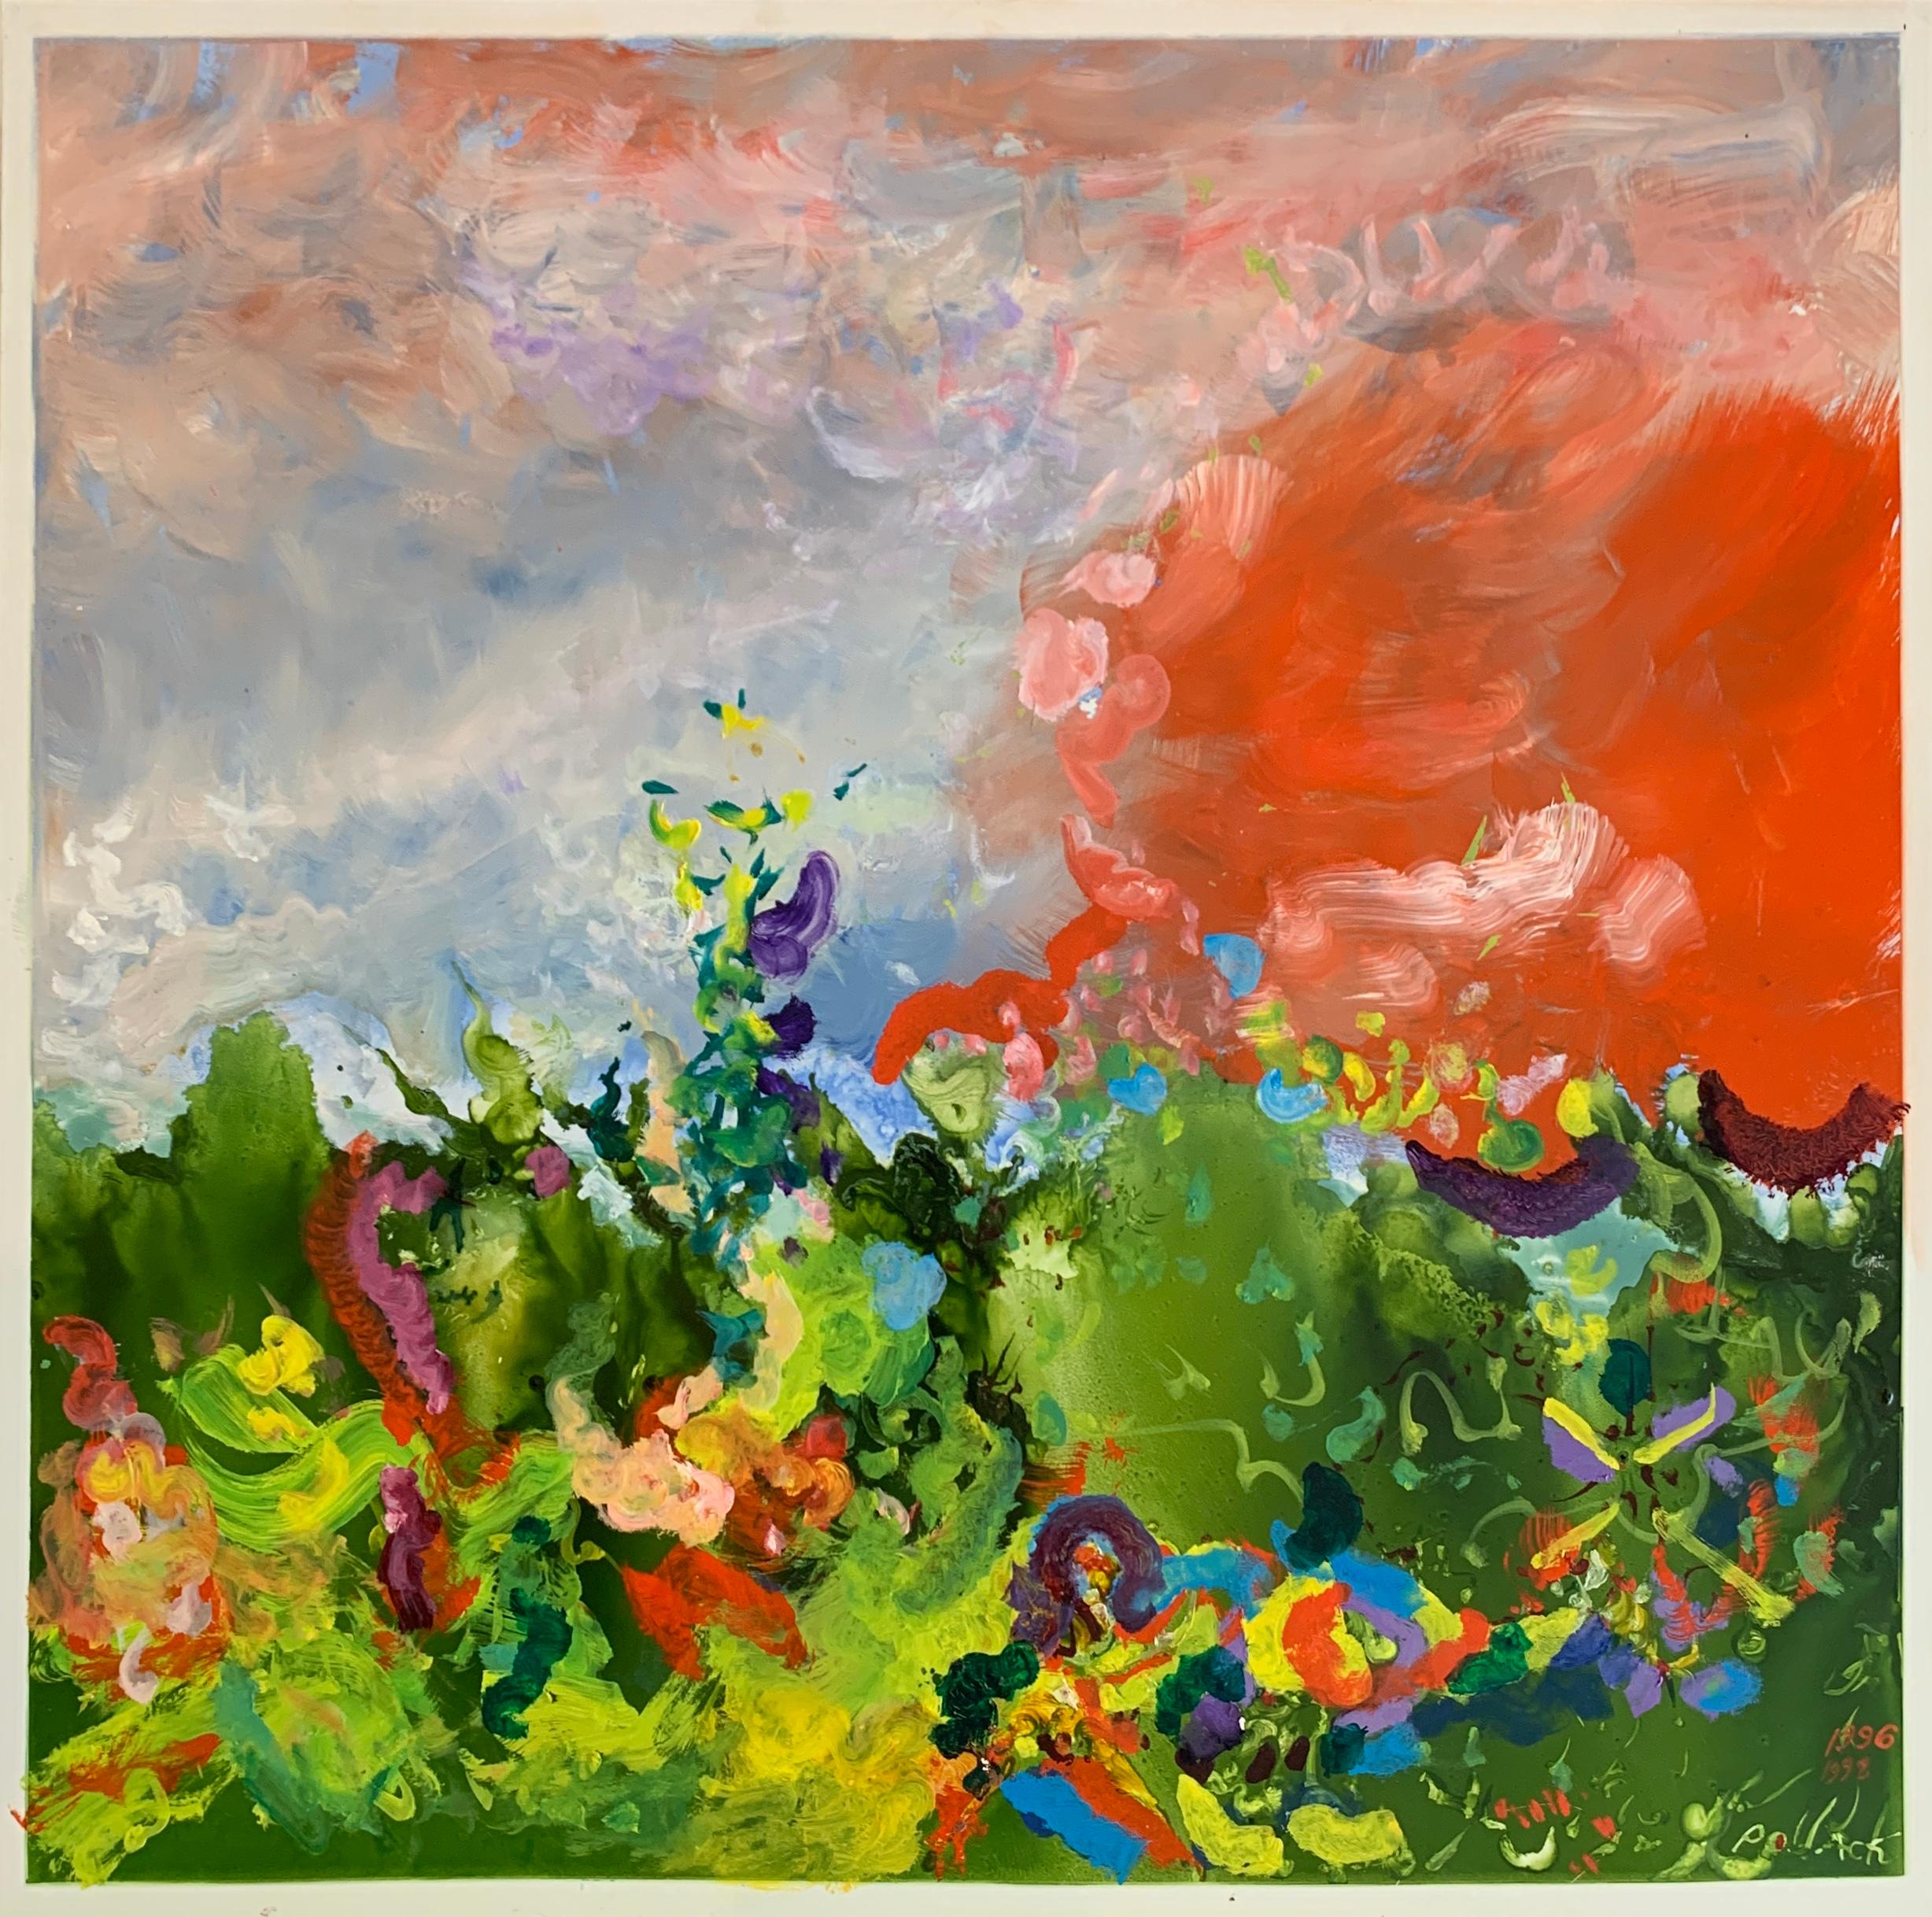 "Summer Dance" Reginald Pollack Abstract Expressionist Oil on Masonite Flowers

Oil on Masonite painting by late American Artist Reginald Pollack.  It has a 1/4" to 3/8" white masonite border.  A new black frame is available, $75, please